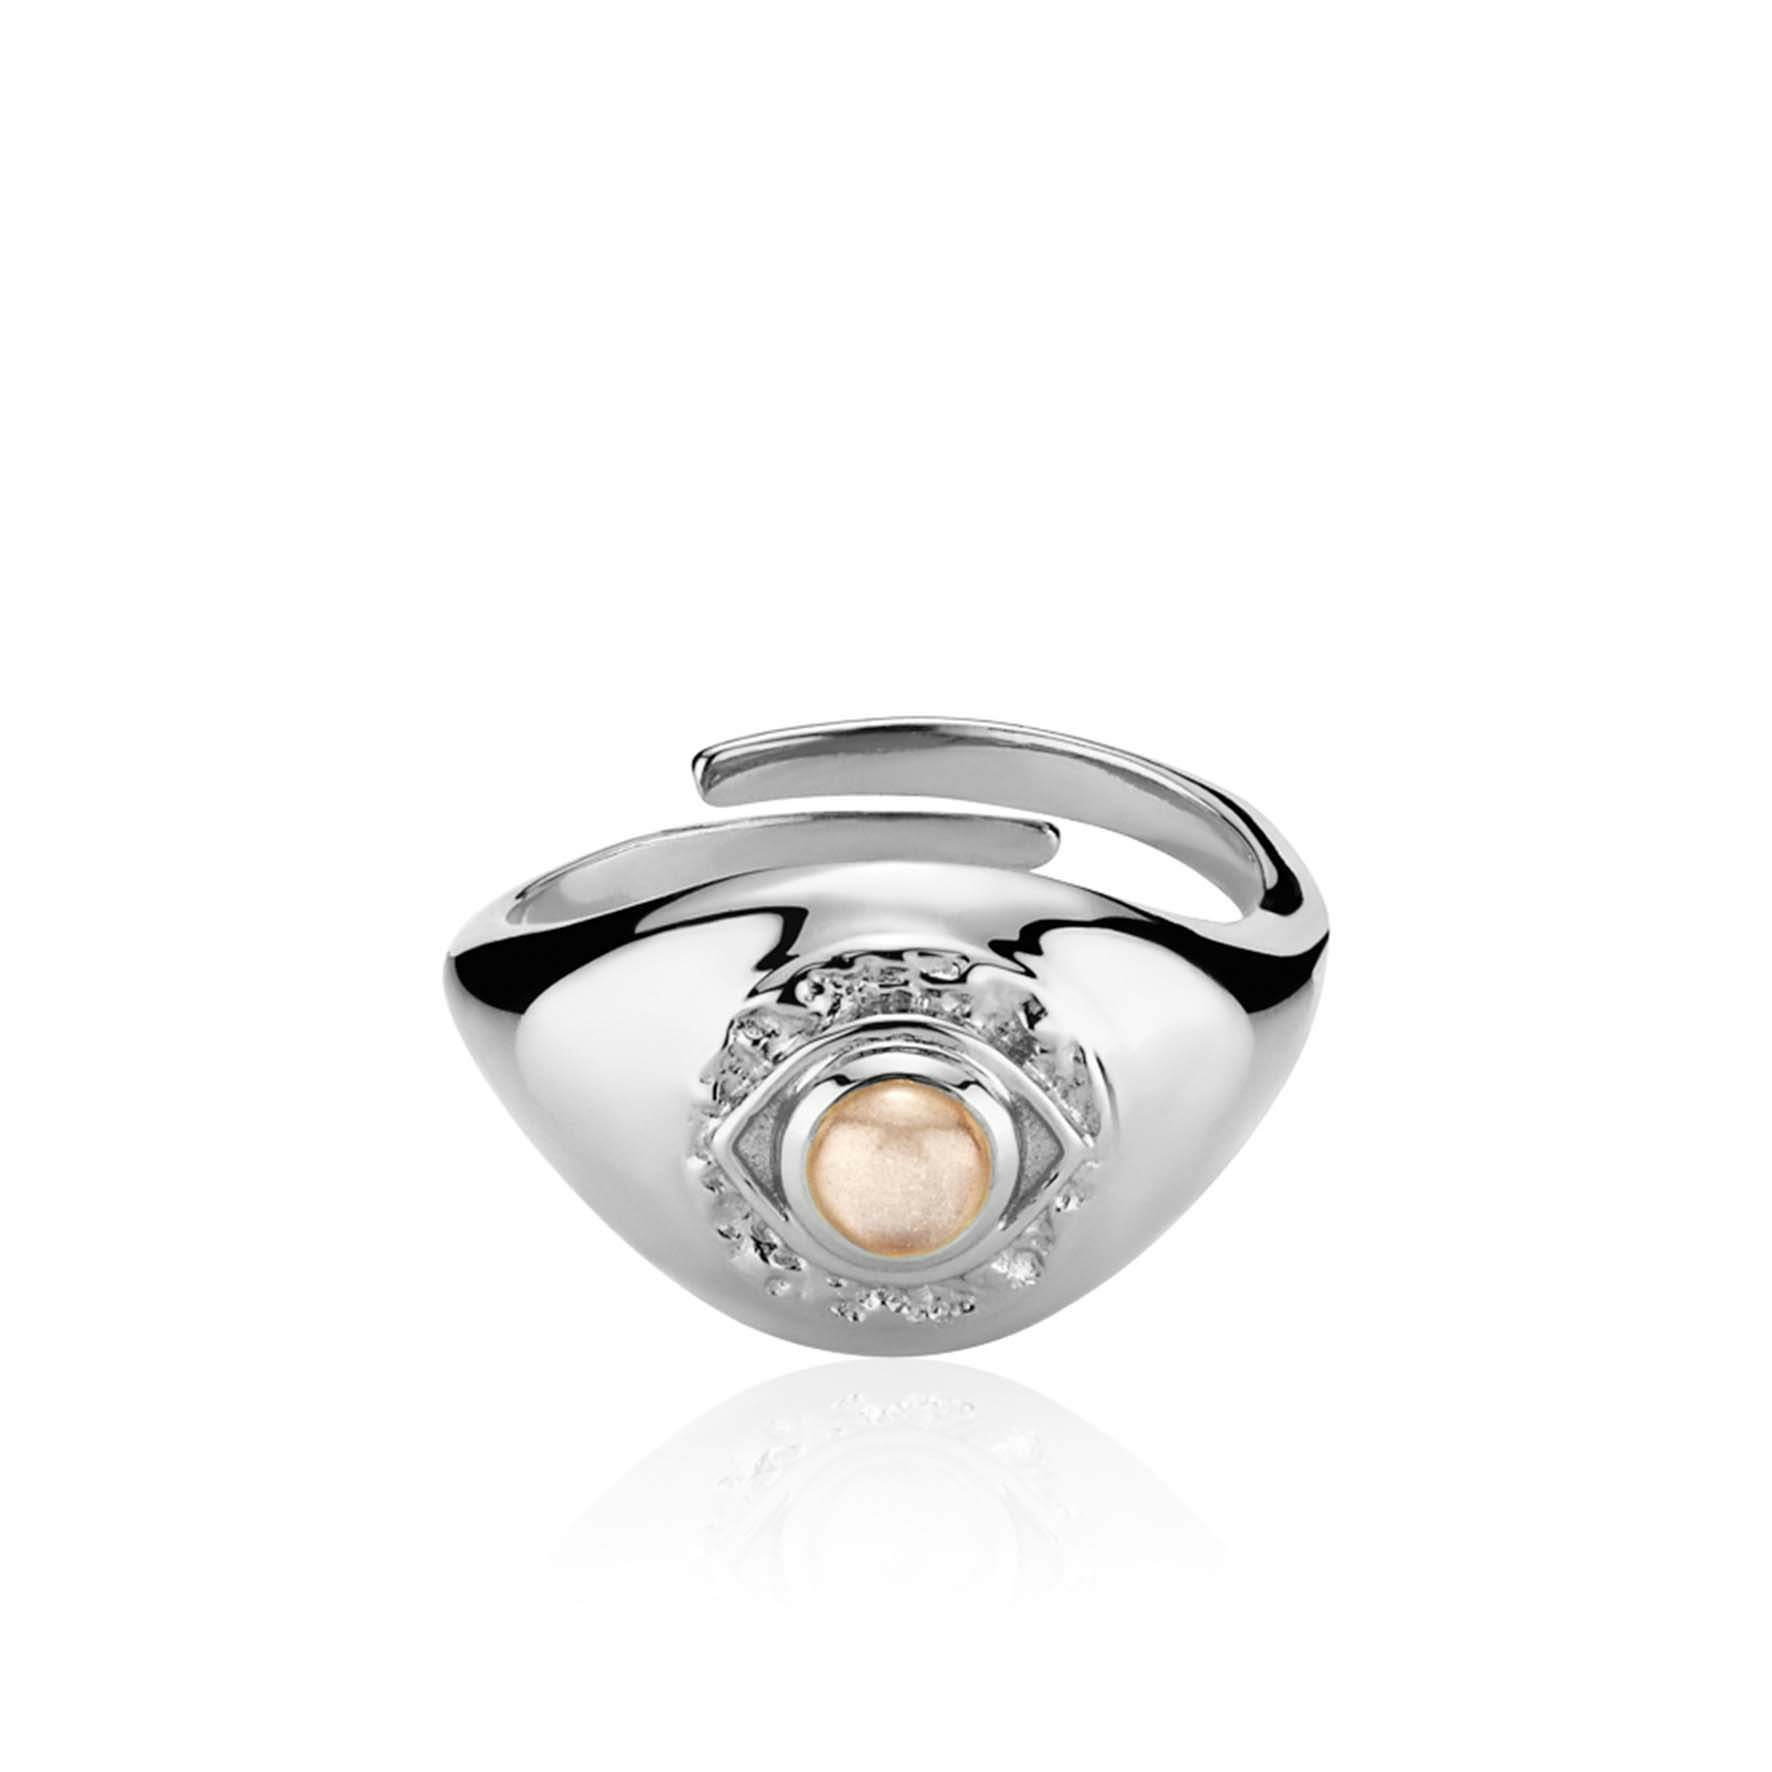 Hanna Martine by Sistie Ring from Sistie in Silver Sterling 925